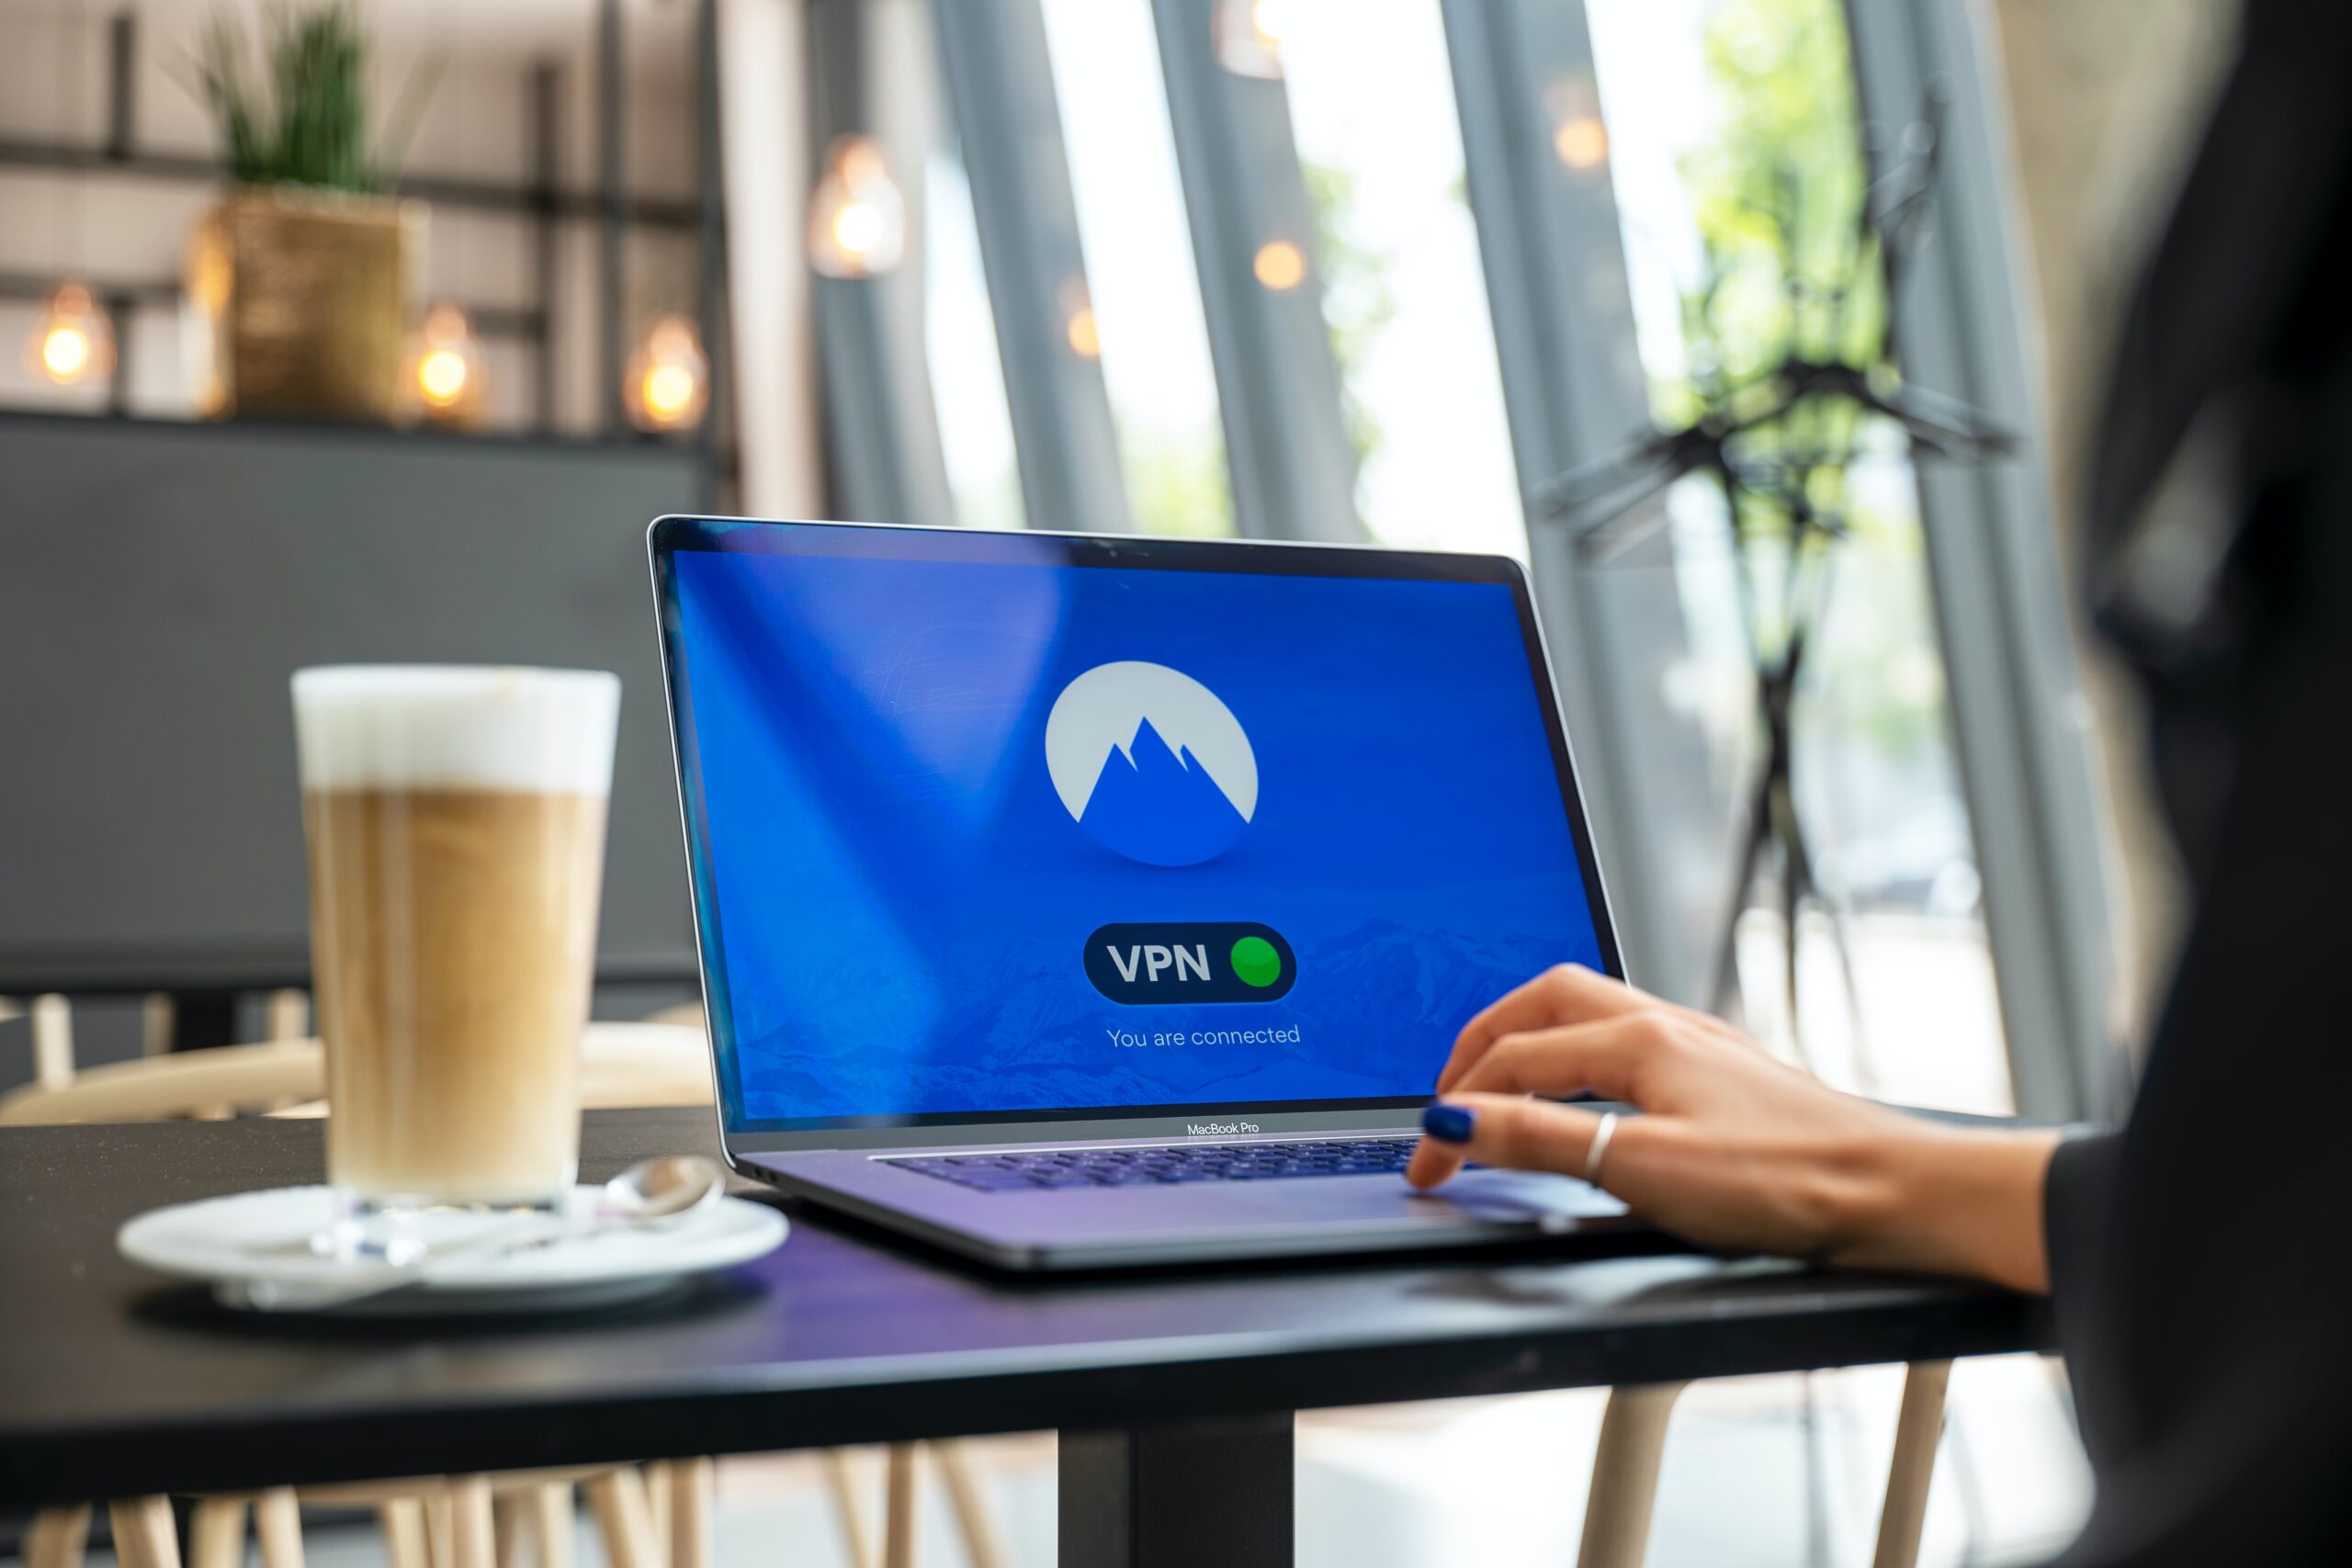  Can You Use A VPN On Linux?